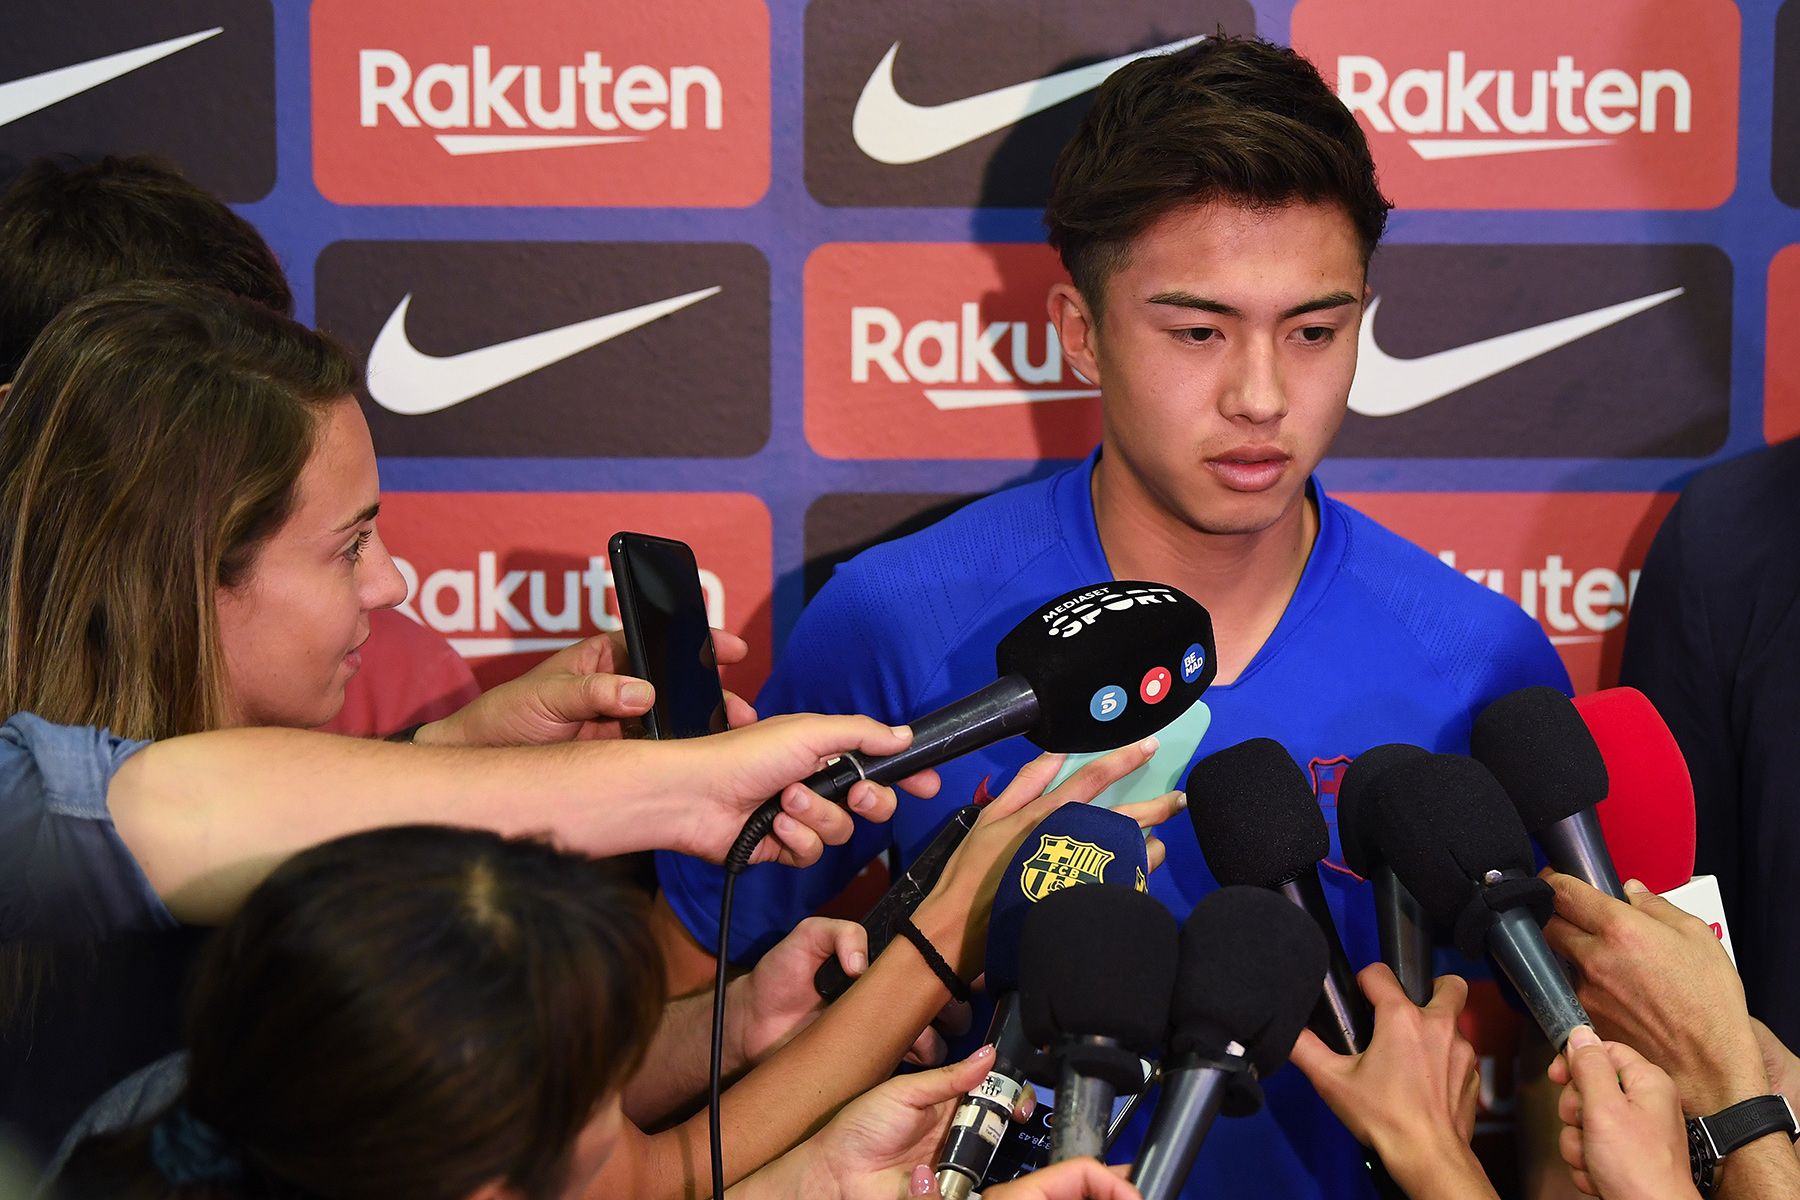 Hiroki Abe, interviewed by the media after a training